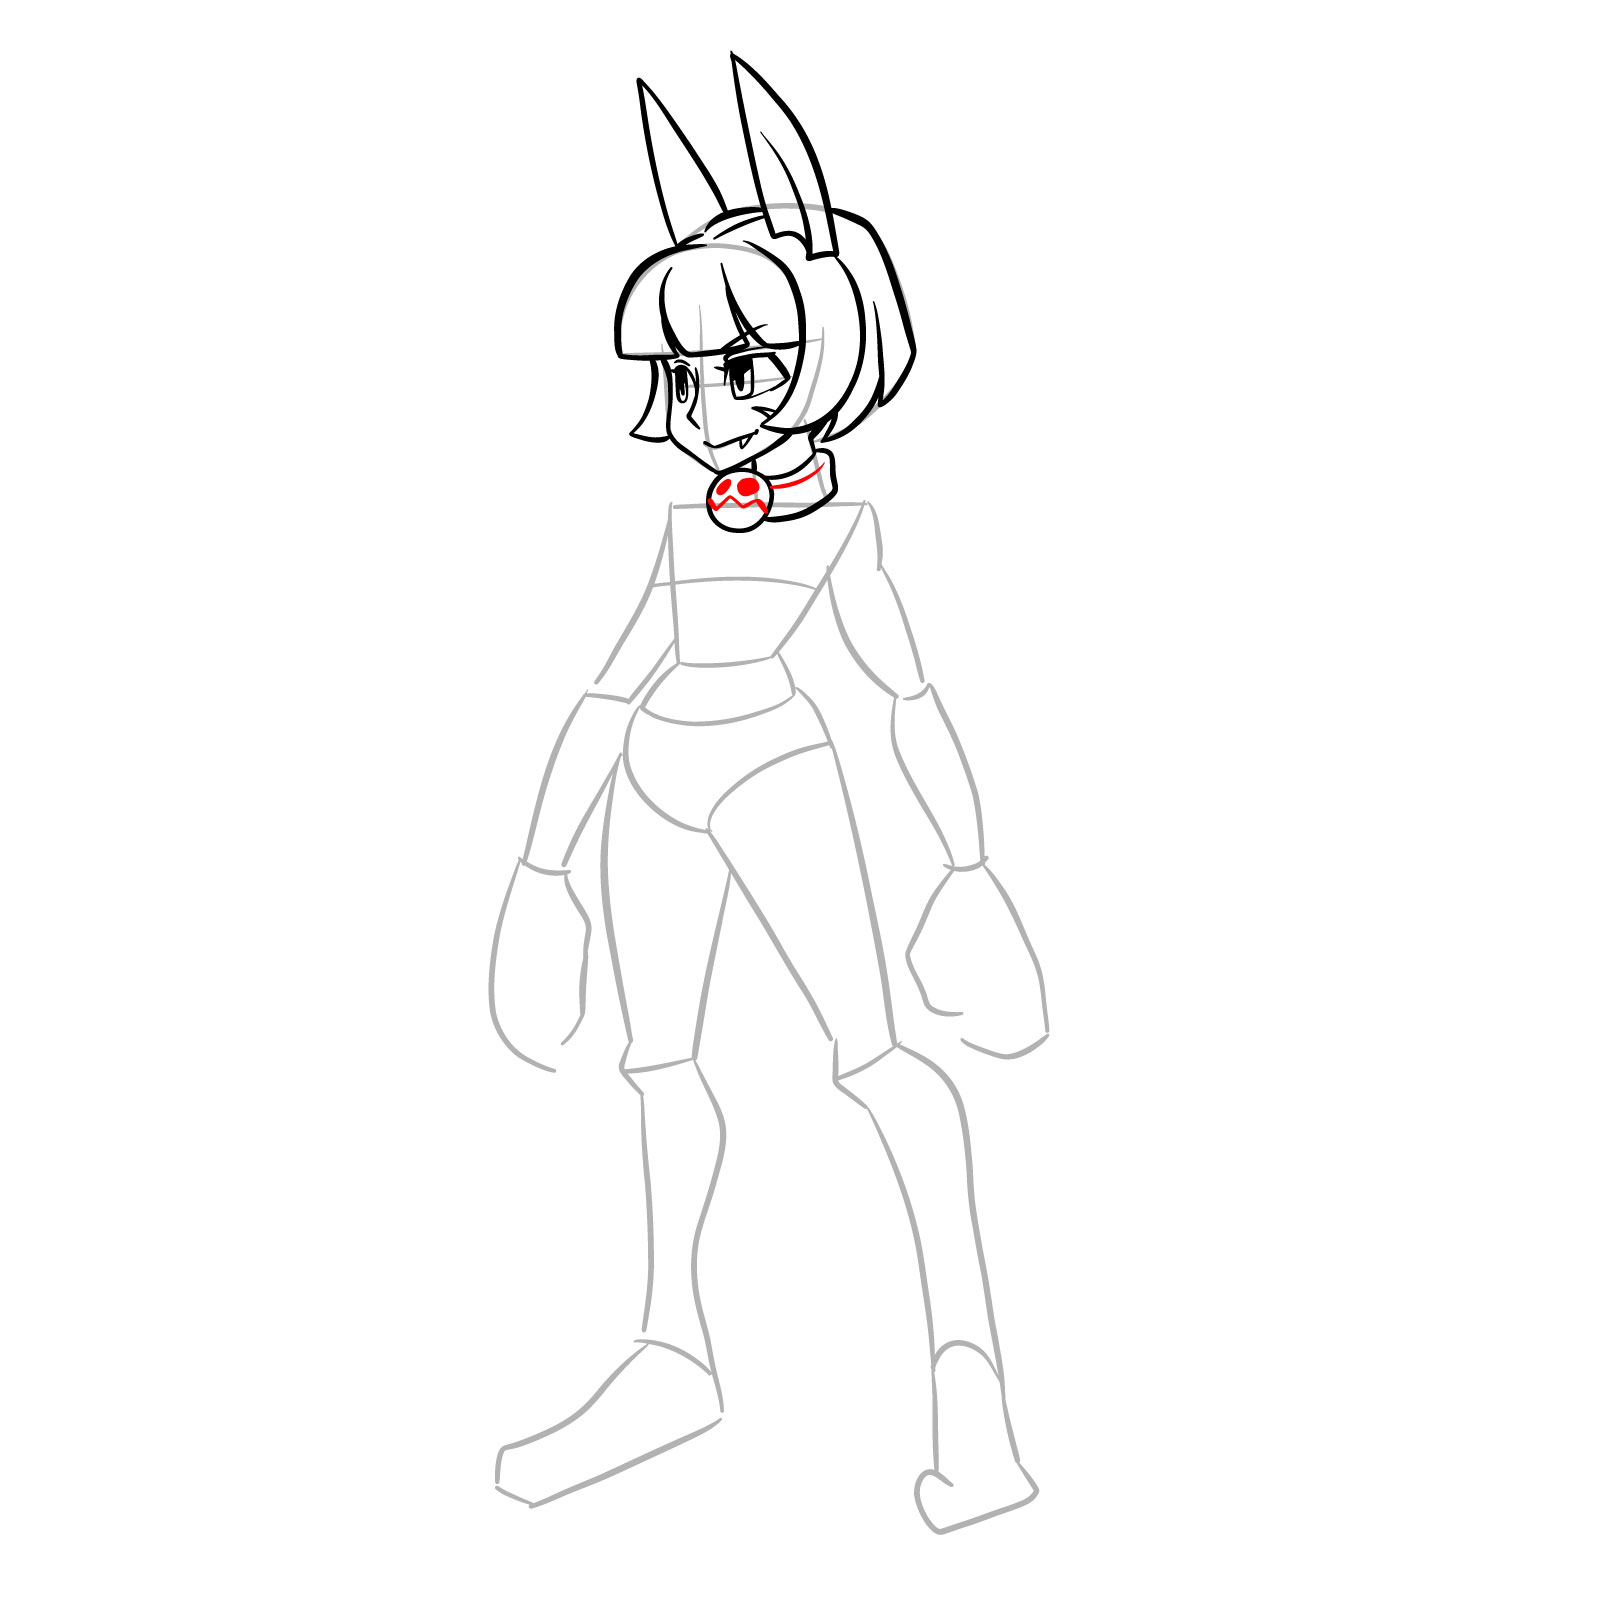 How to draw Ms. Fortune from Skullgirls - step 14